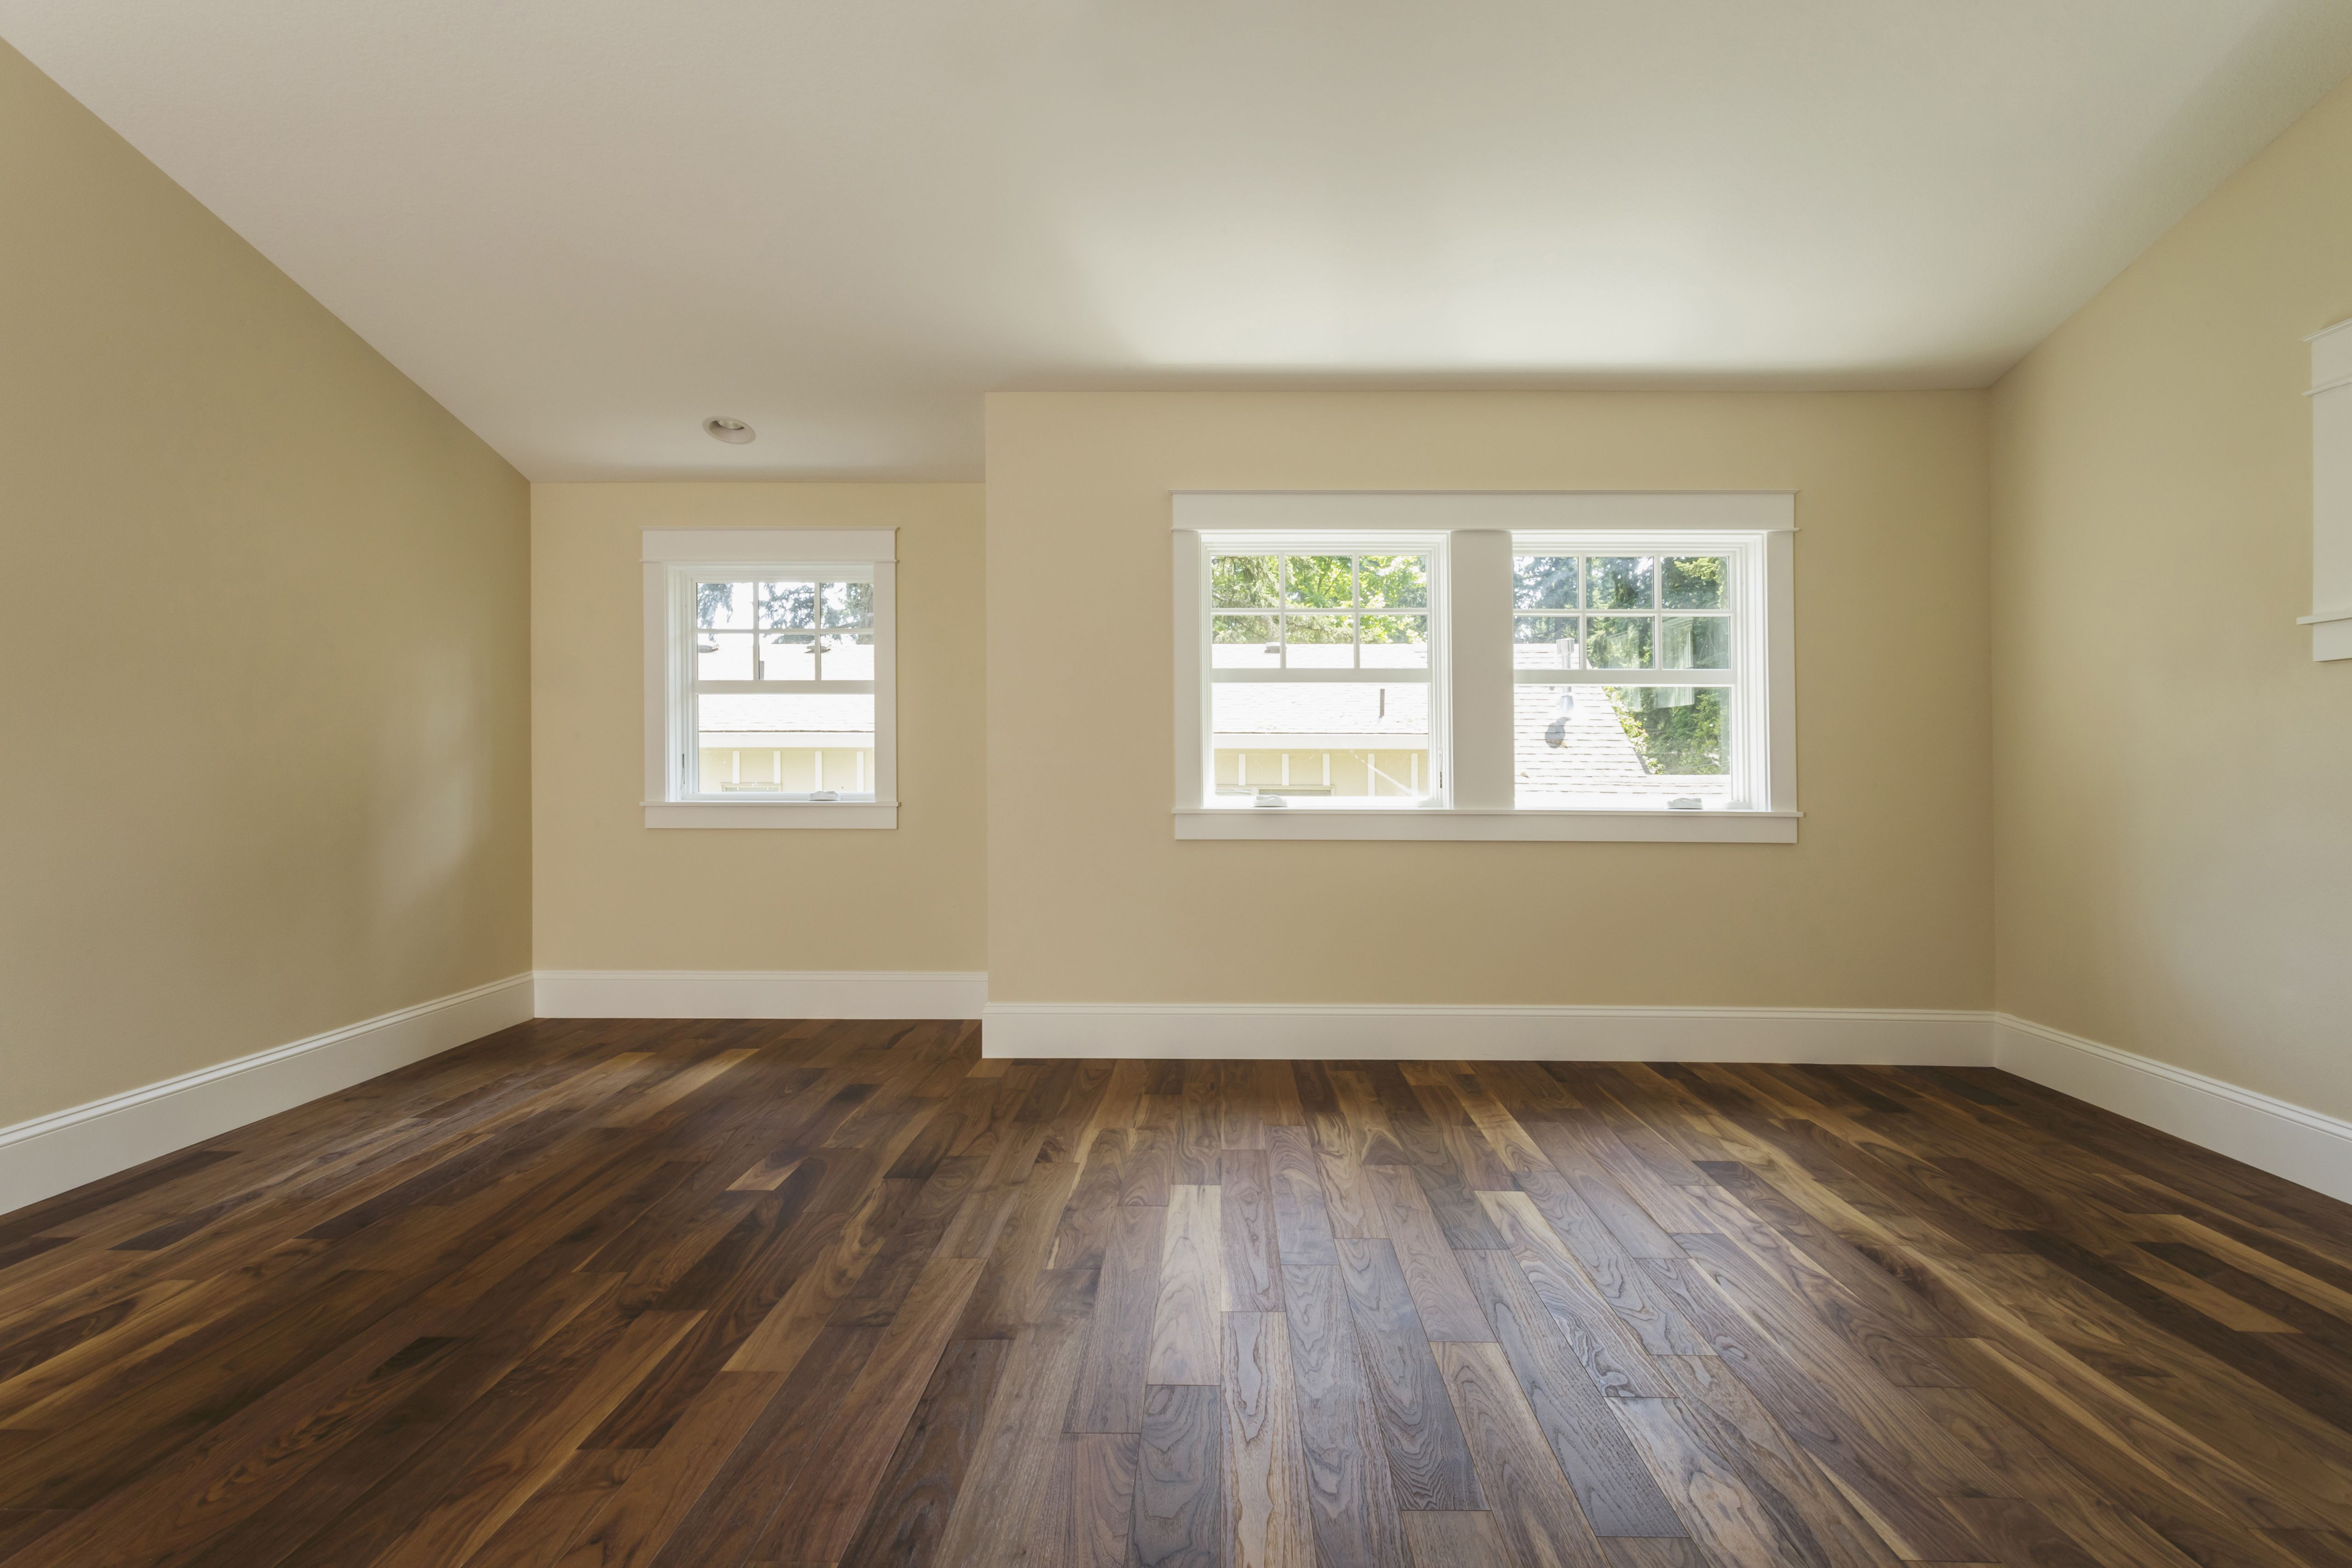 21 Elegant Can You Lay Hardwood Floors Over Tile 2024 free download can you lay hardwood floors over tile of its easy and fast to install plank vinyl flooring in wooden floor in empty bedroom 482143001 588bd5f45f9b5874eebd56e9